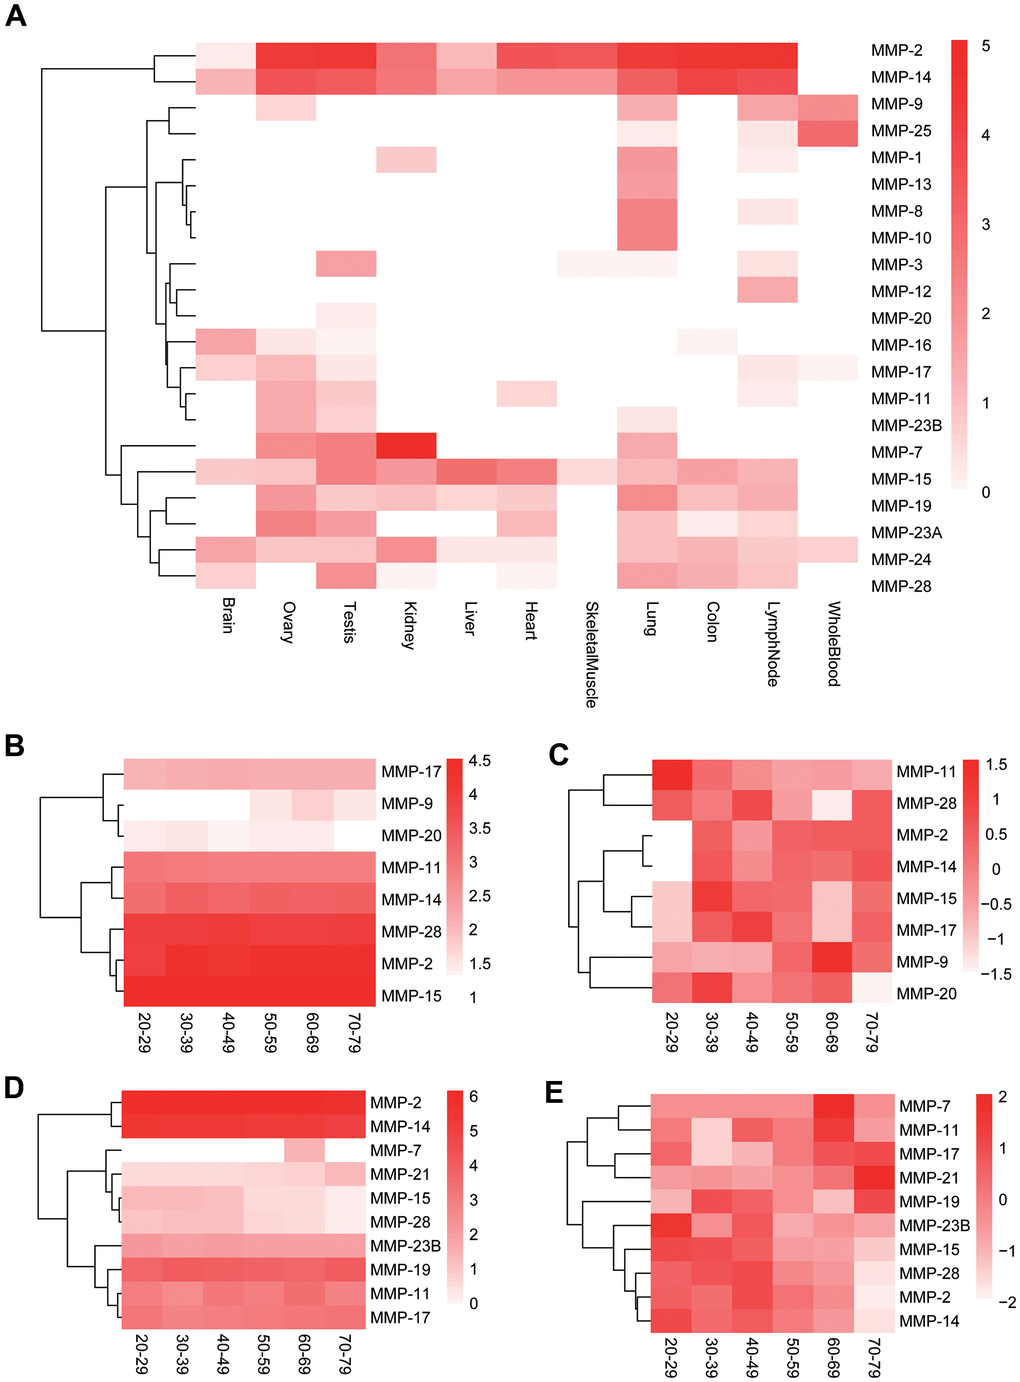 Expression of human MMP genes. (A) Heatmap of human MMP gene expression in 11 tissues. (B) Longitudinal expression of human MMPs in testis (not normalized). (C) Longitudinal expression of human MMPs in testis (normalized). (D) Longitudinal expression of human MMPs in ovary (not normalized). (E) Longitudinal expression of human MMPs in ovary (normalized). The MMP genes are clustered based on expression patterns.